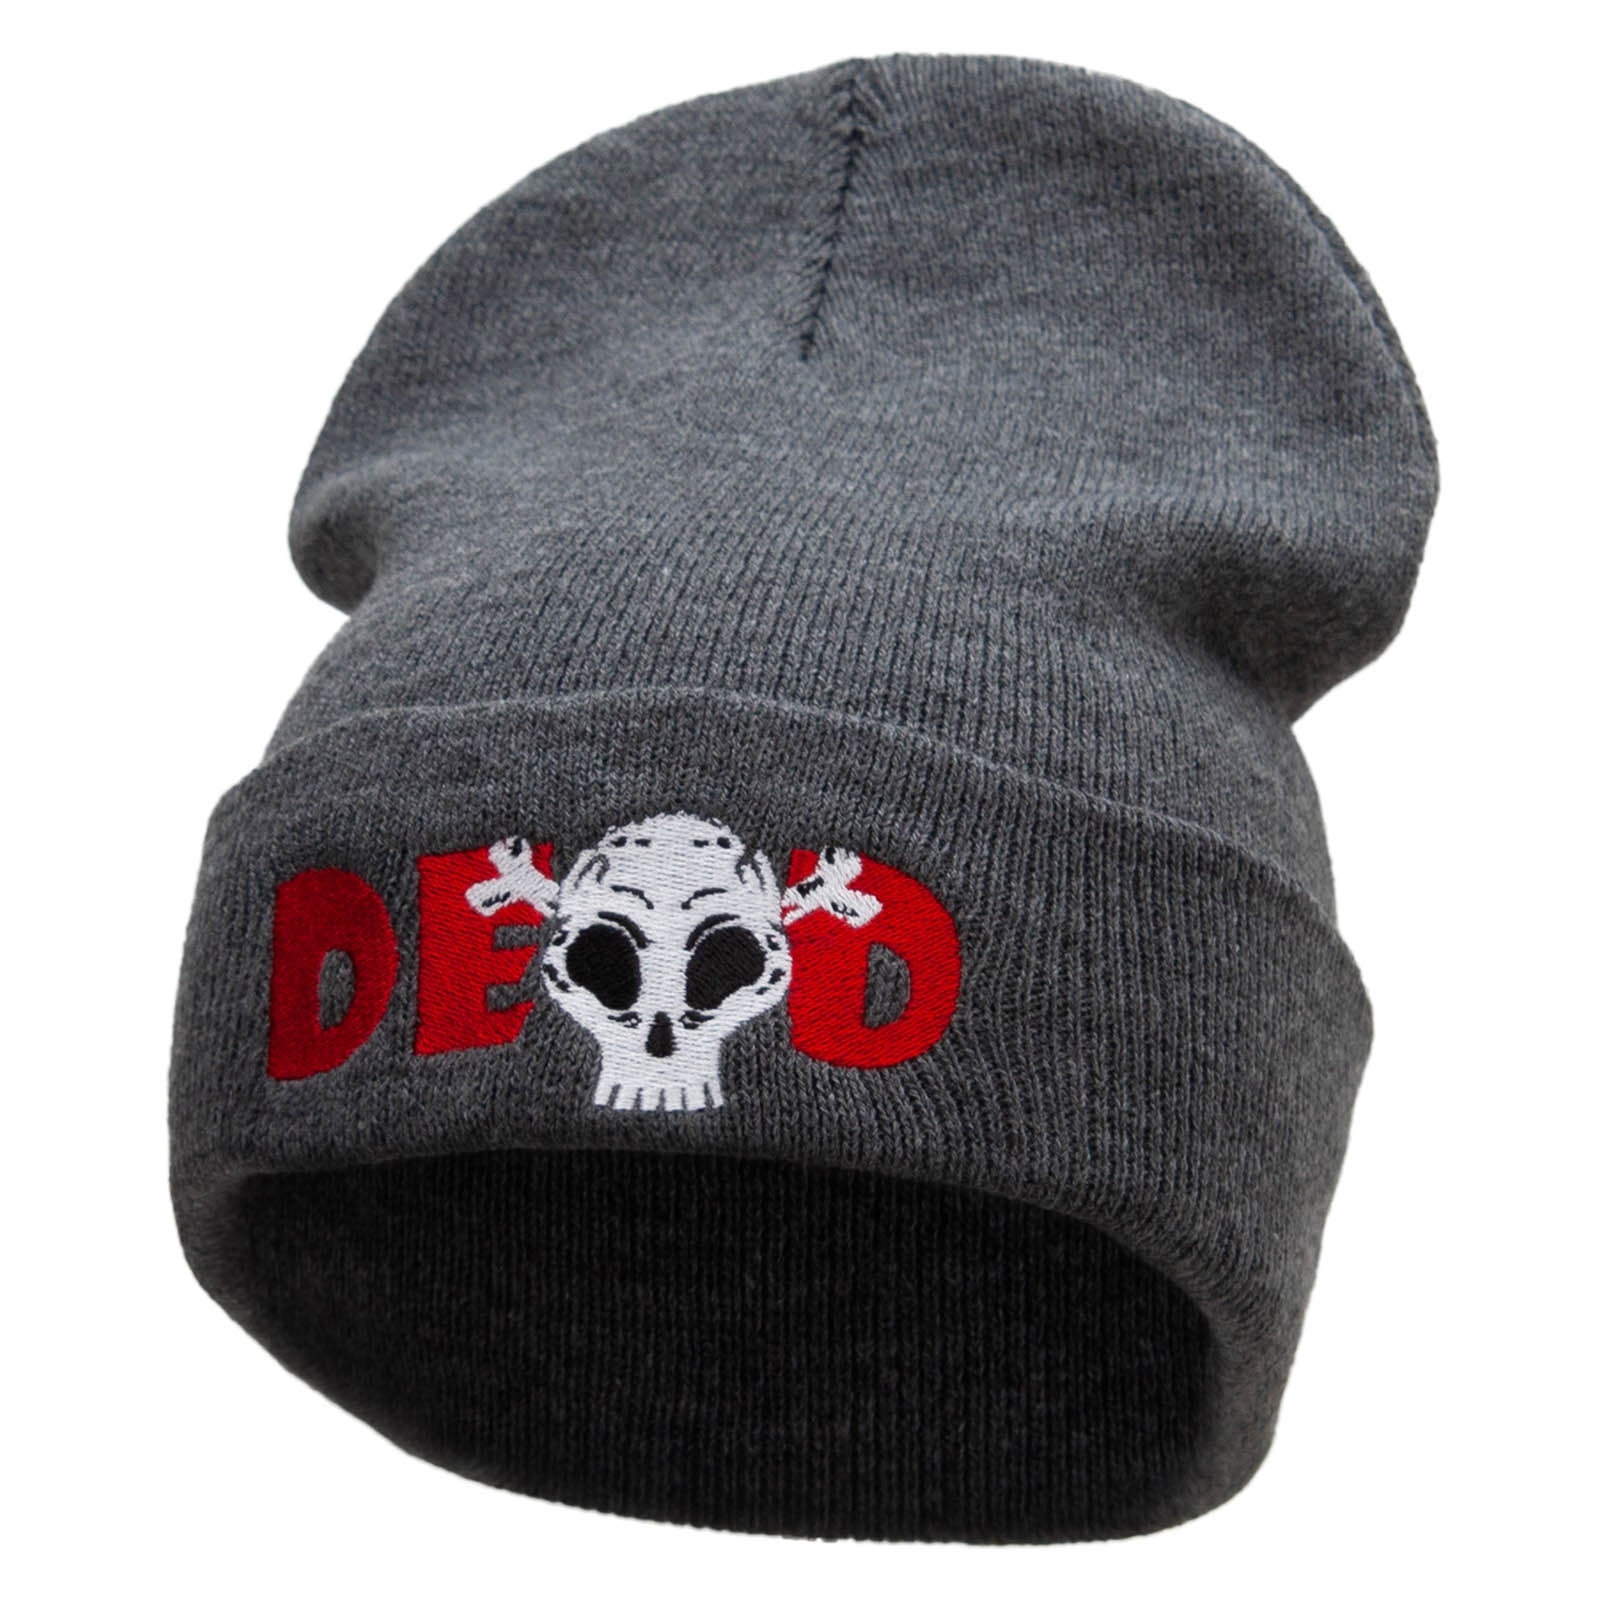 Dead Skull Embroidered 12 Inch Long Knitted Beanie - Dk Grey OSFM